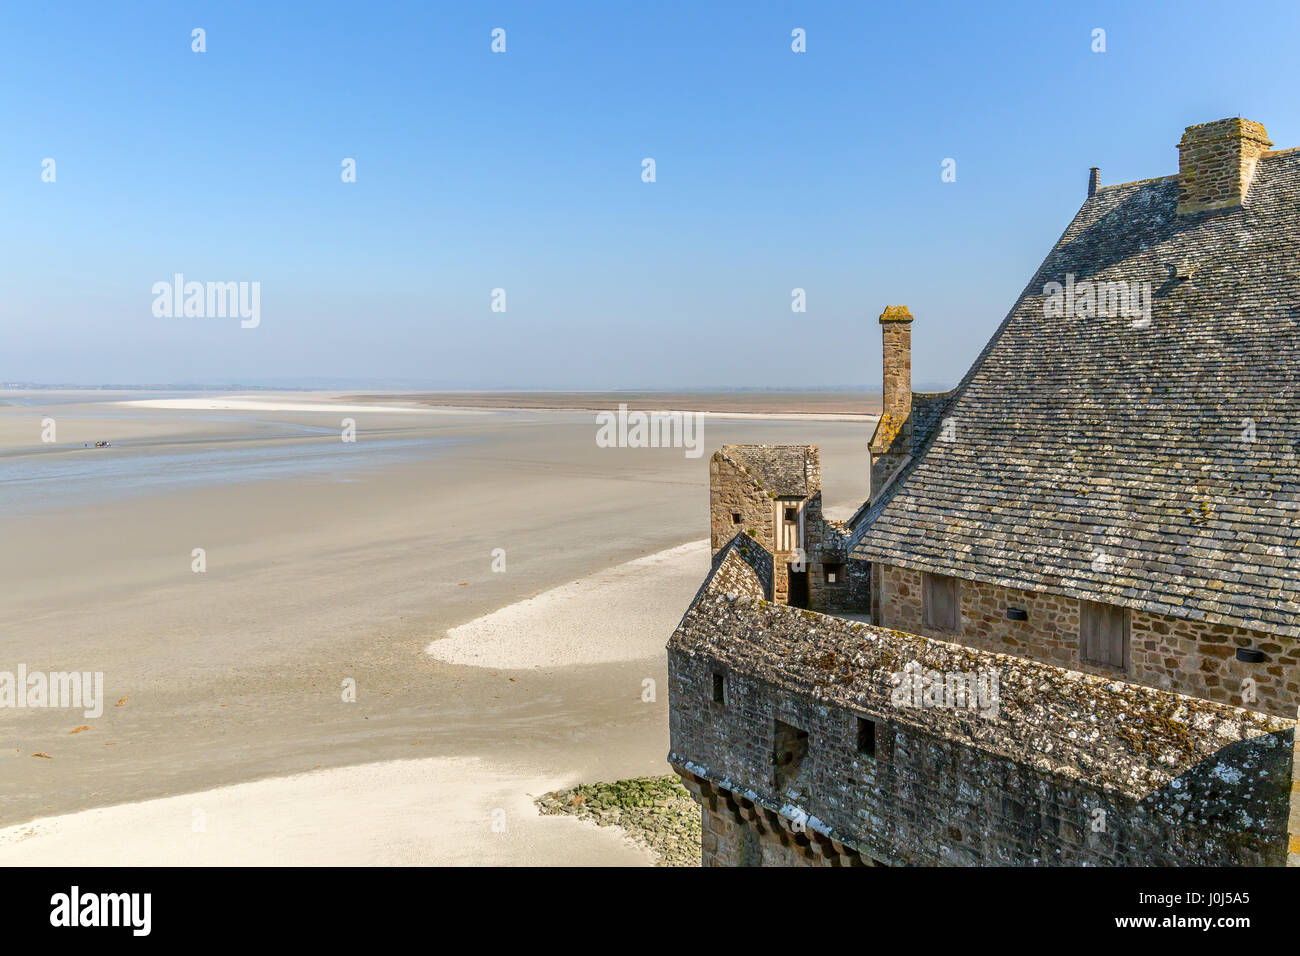 View from the Mont-Saint-Michel Abbey on a tidal island and mainland commune in Normandy, in the department of Manche, France. Stock Photo